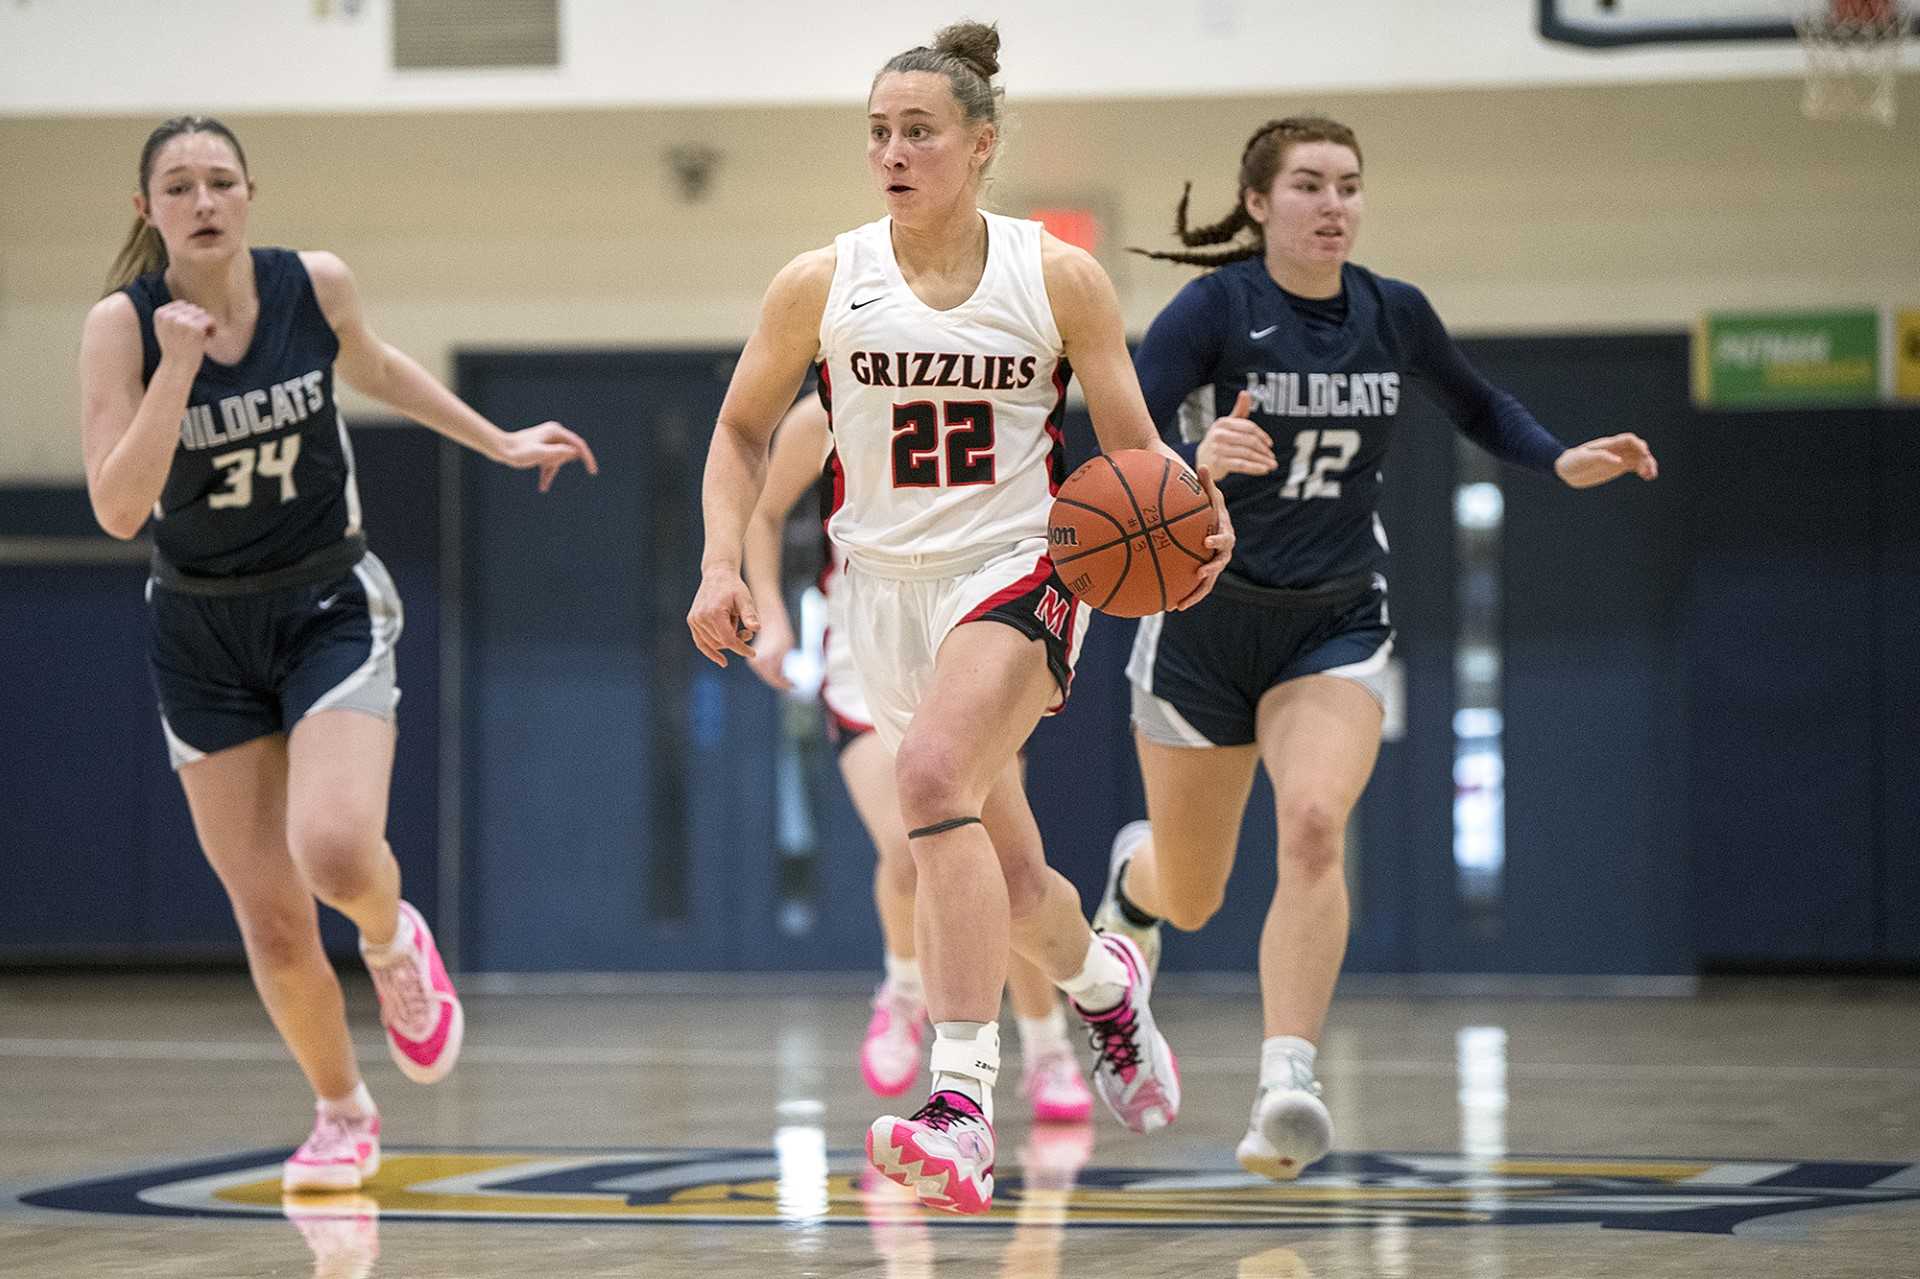 McMinnville junior point guard Macie Arzner is averaging 20.3 points and 15.2 rebounds. (Rusty Rae/News-Register)